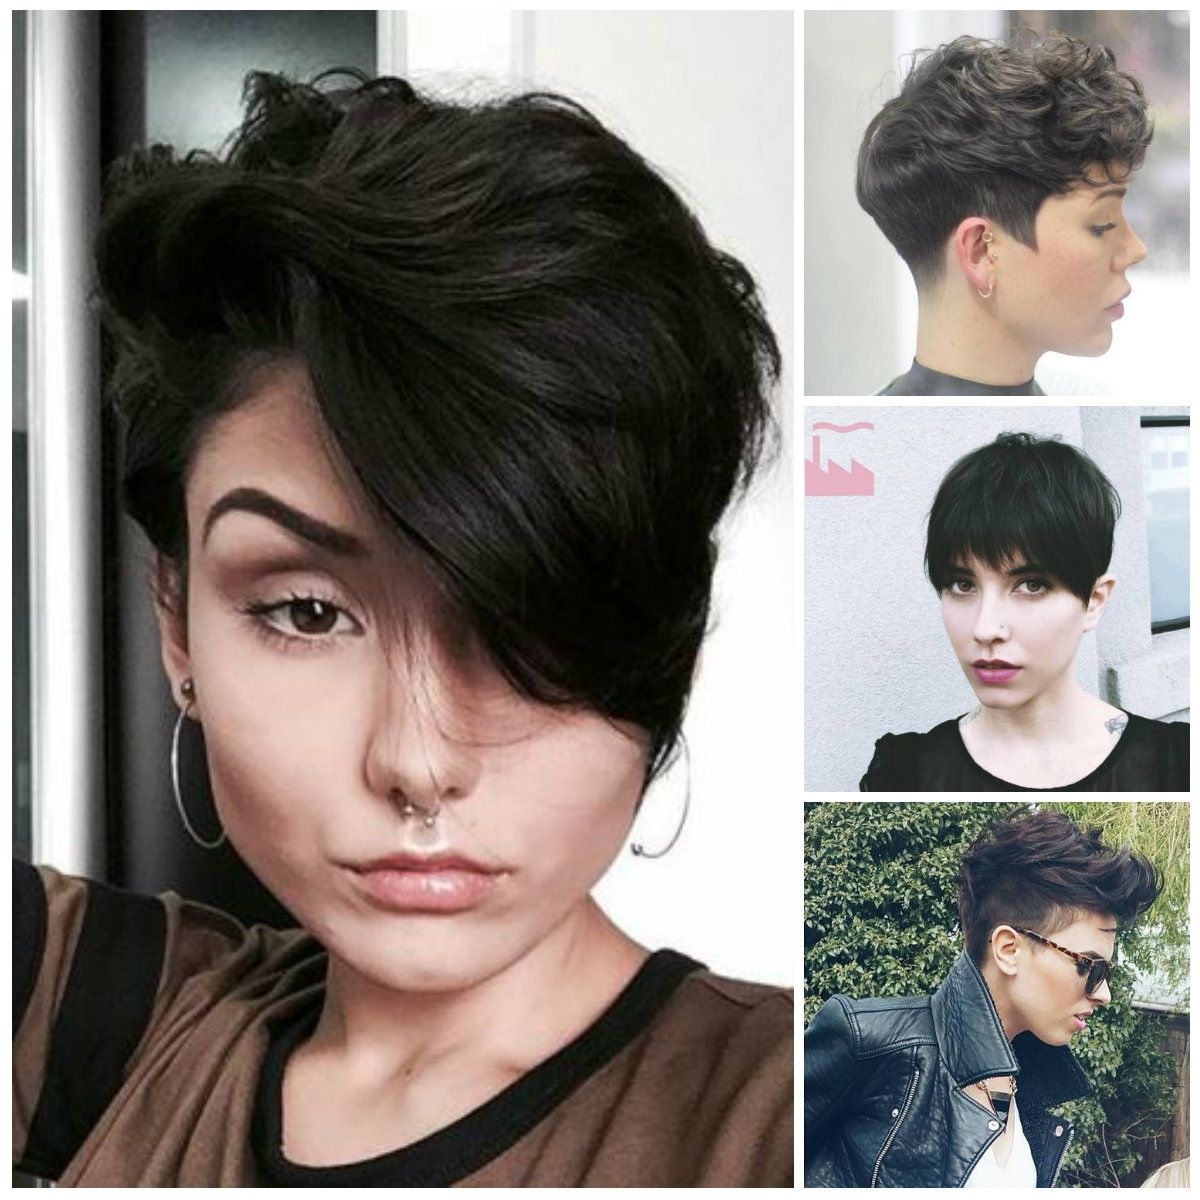 Pixie Haircuts For Thick Hair | 2017 Haircuts, Hairstyles And Hair Throughout Current Pixie Hairstyles For Thick Hair (View 9 of 15)